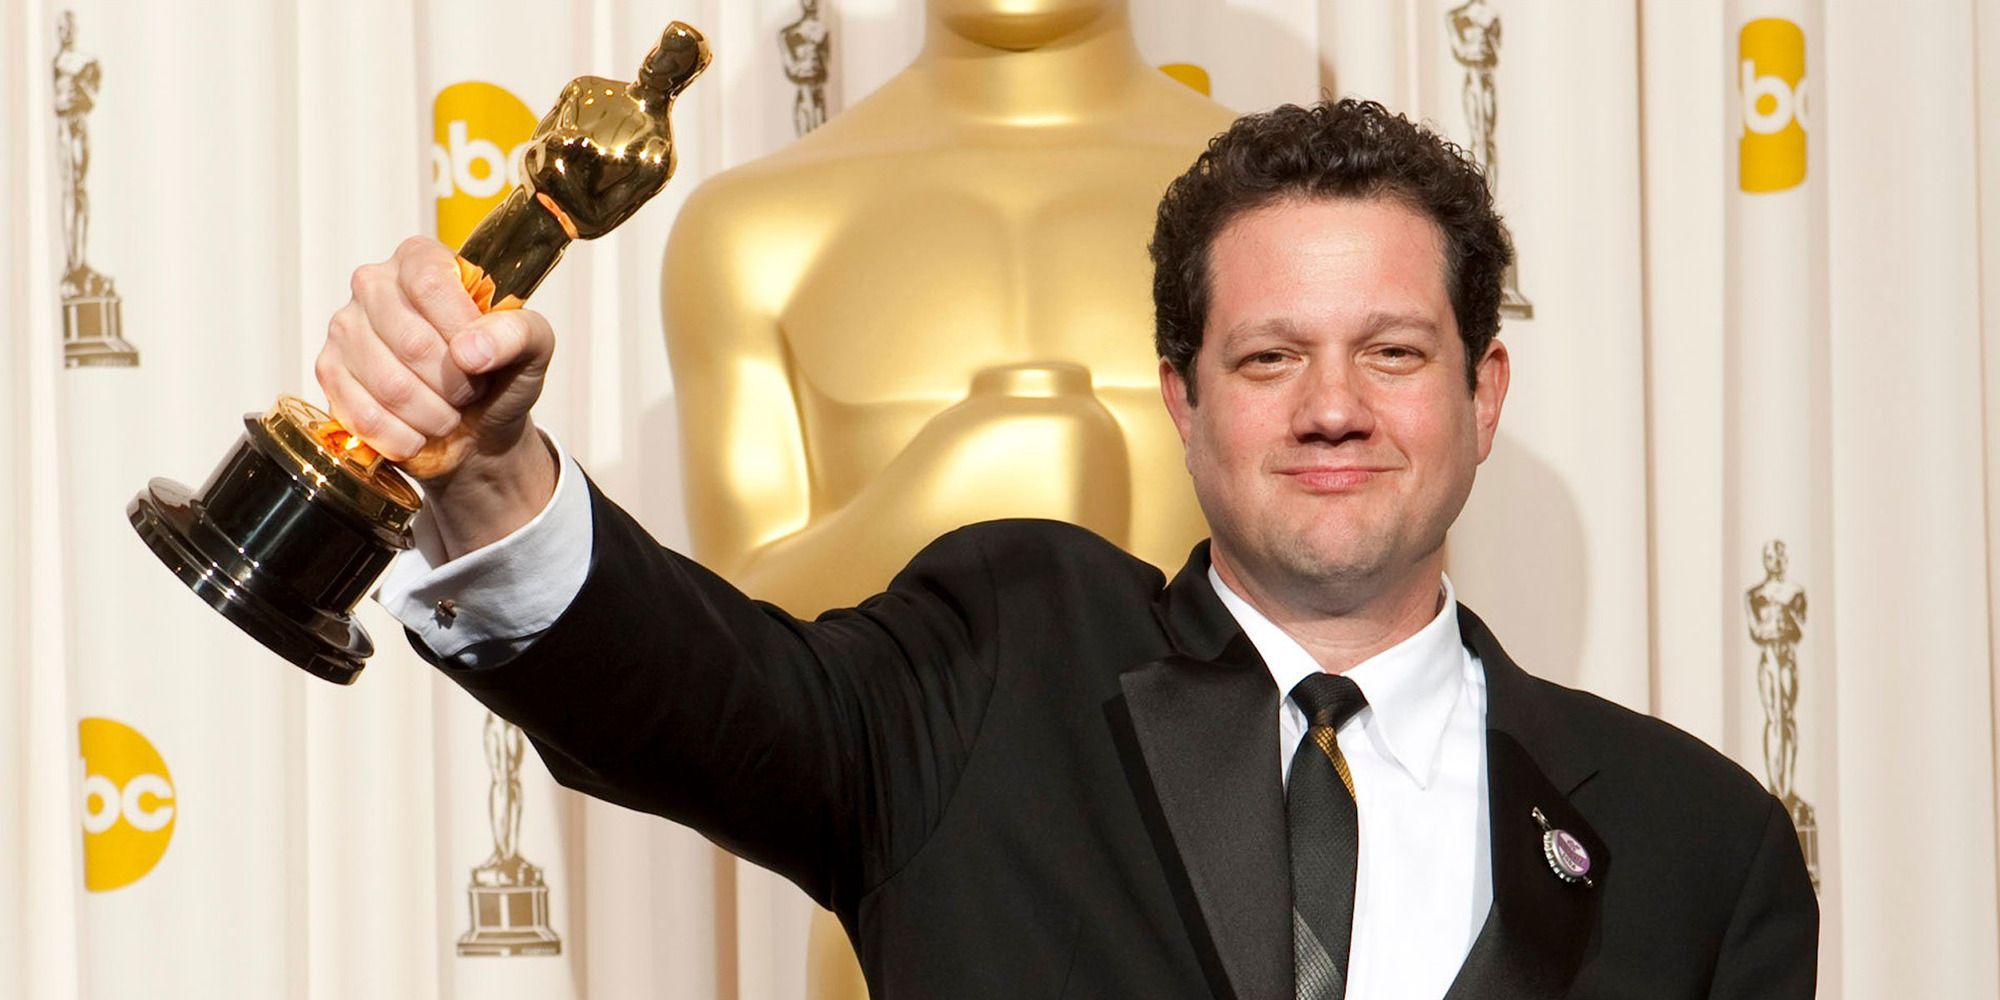 Michael Giacchino holding his Oscar at the event's backstage